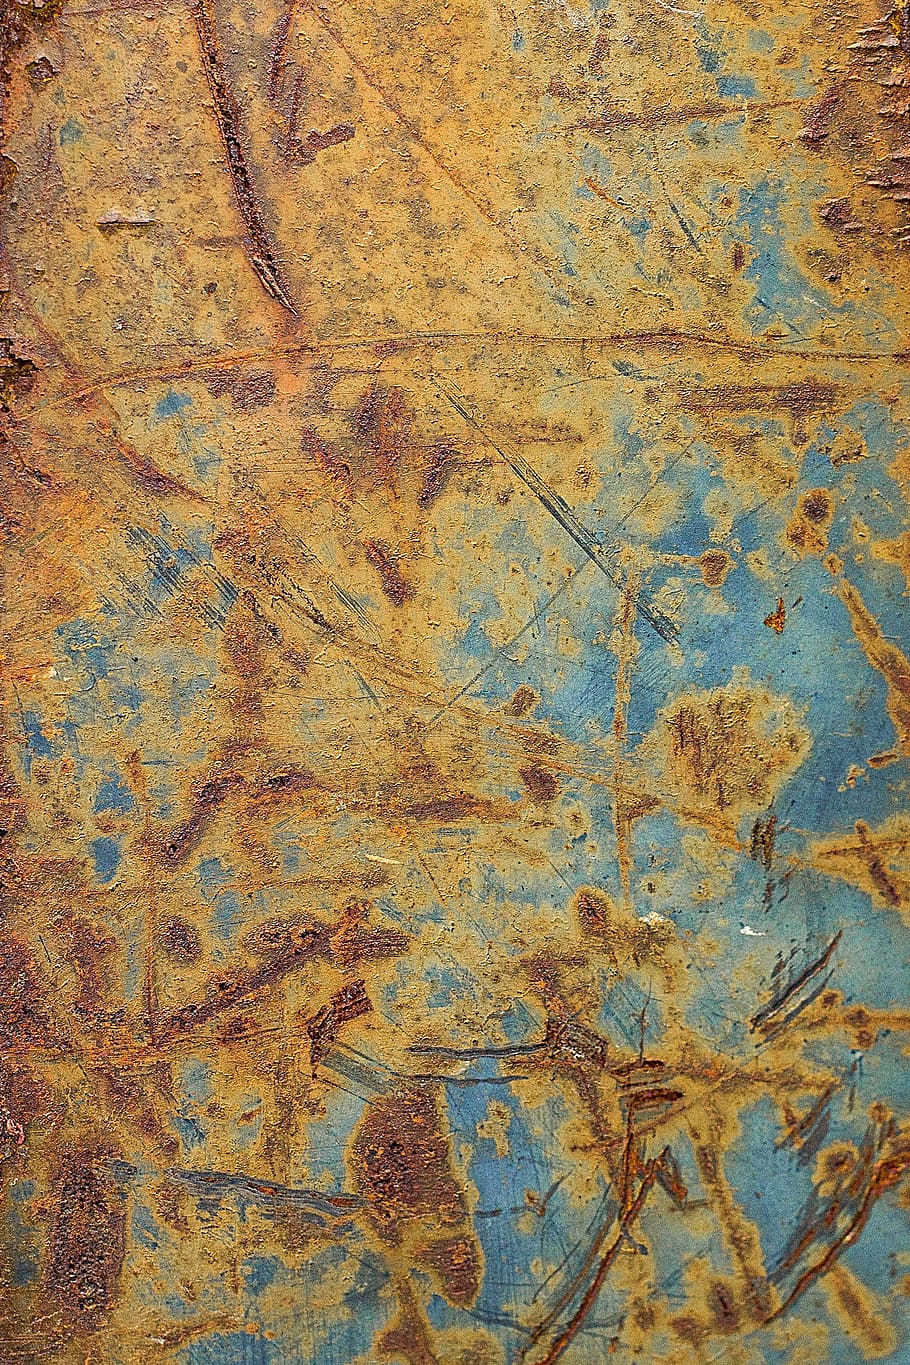 Background, Texture, Metal, Rust, Grunge, metal texture, rusted, weathered, rusting, aged